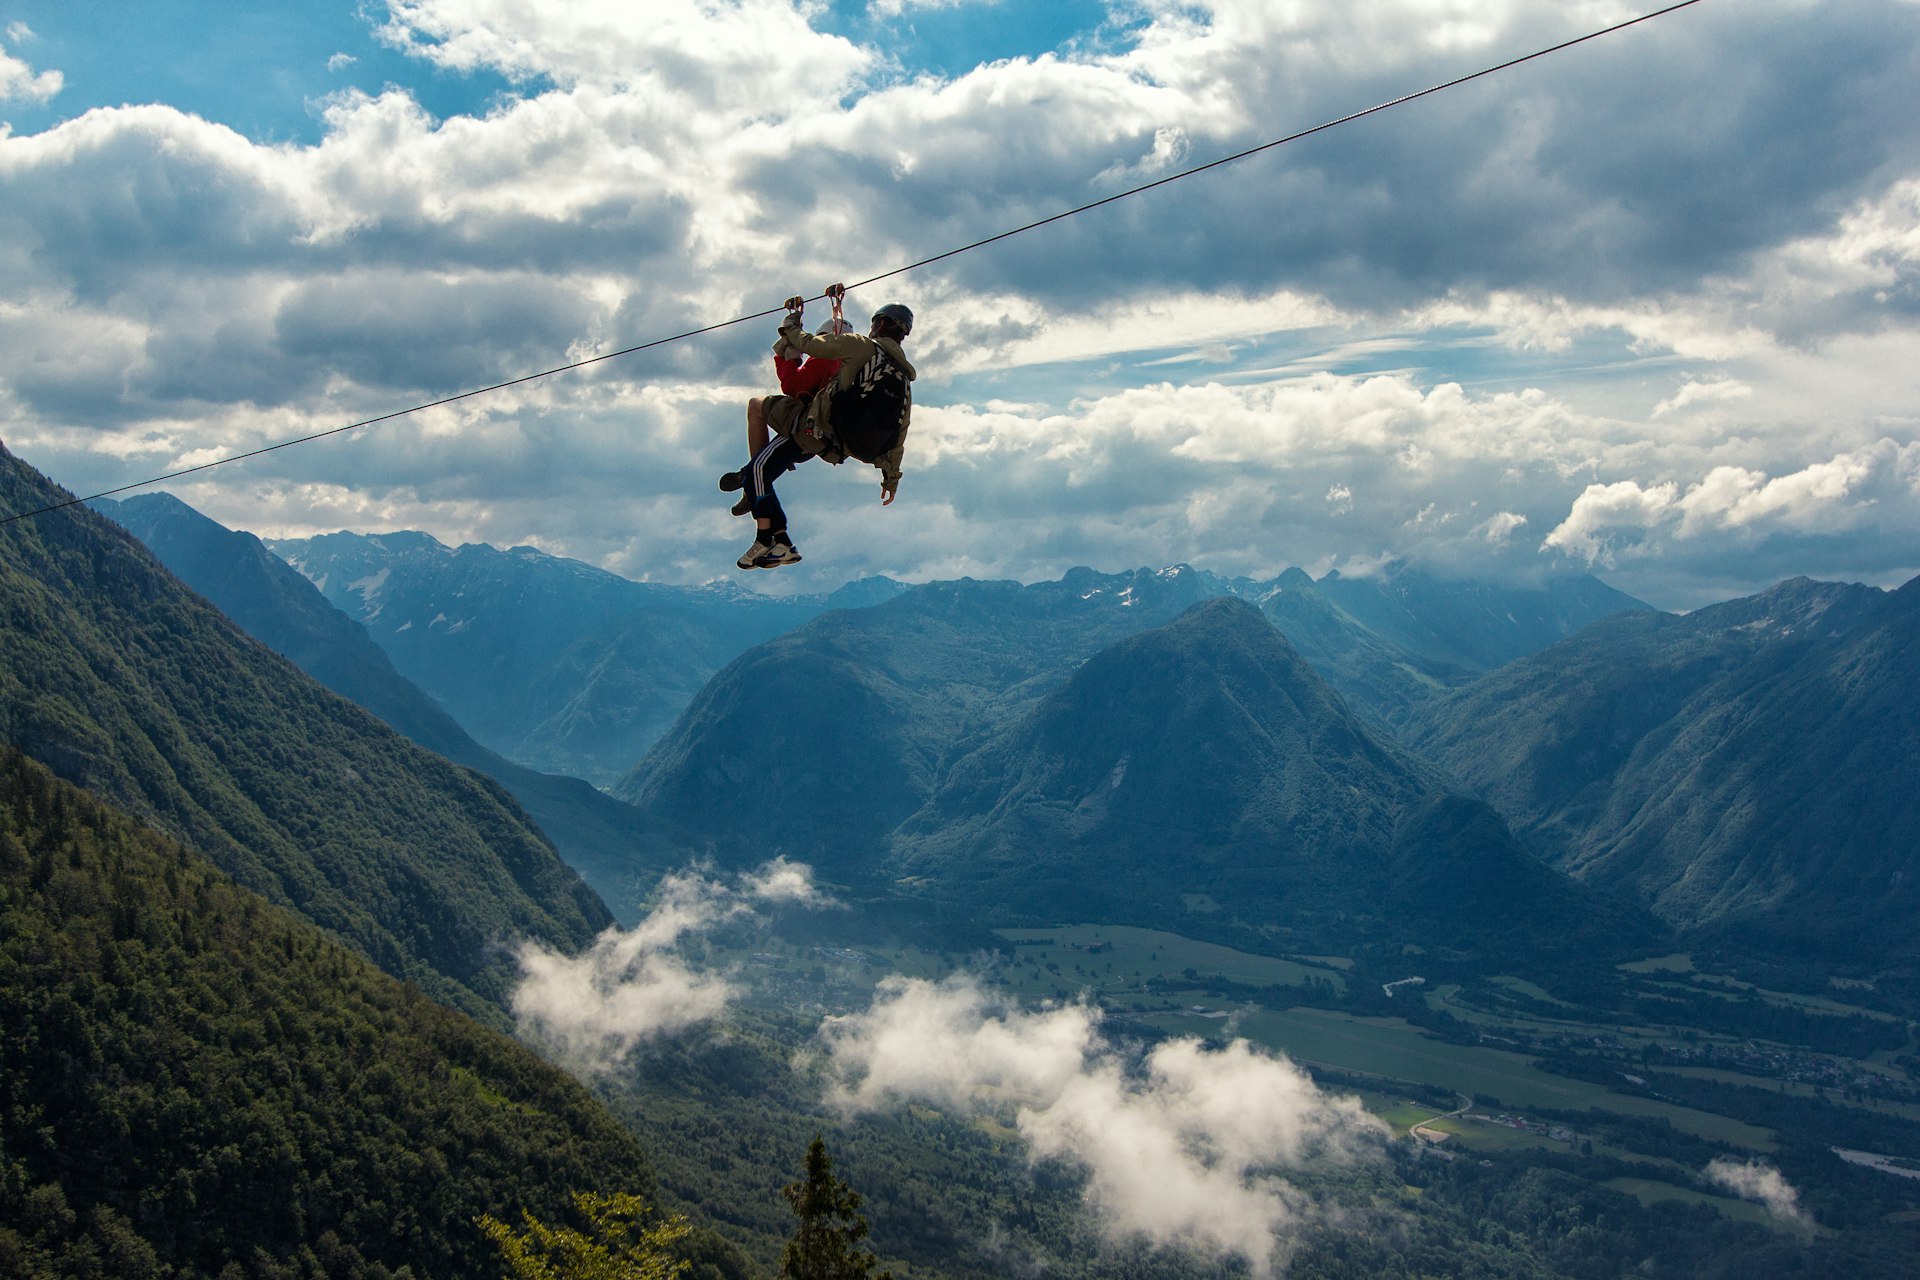 Two people sliding down a zip line with misty mountains behind them